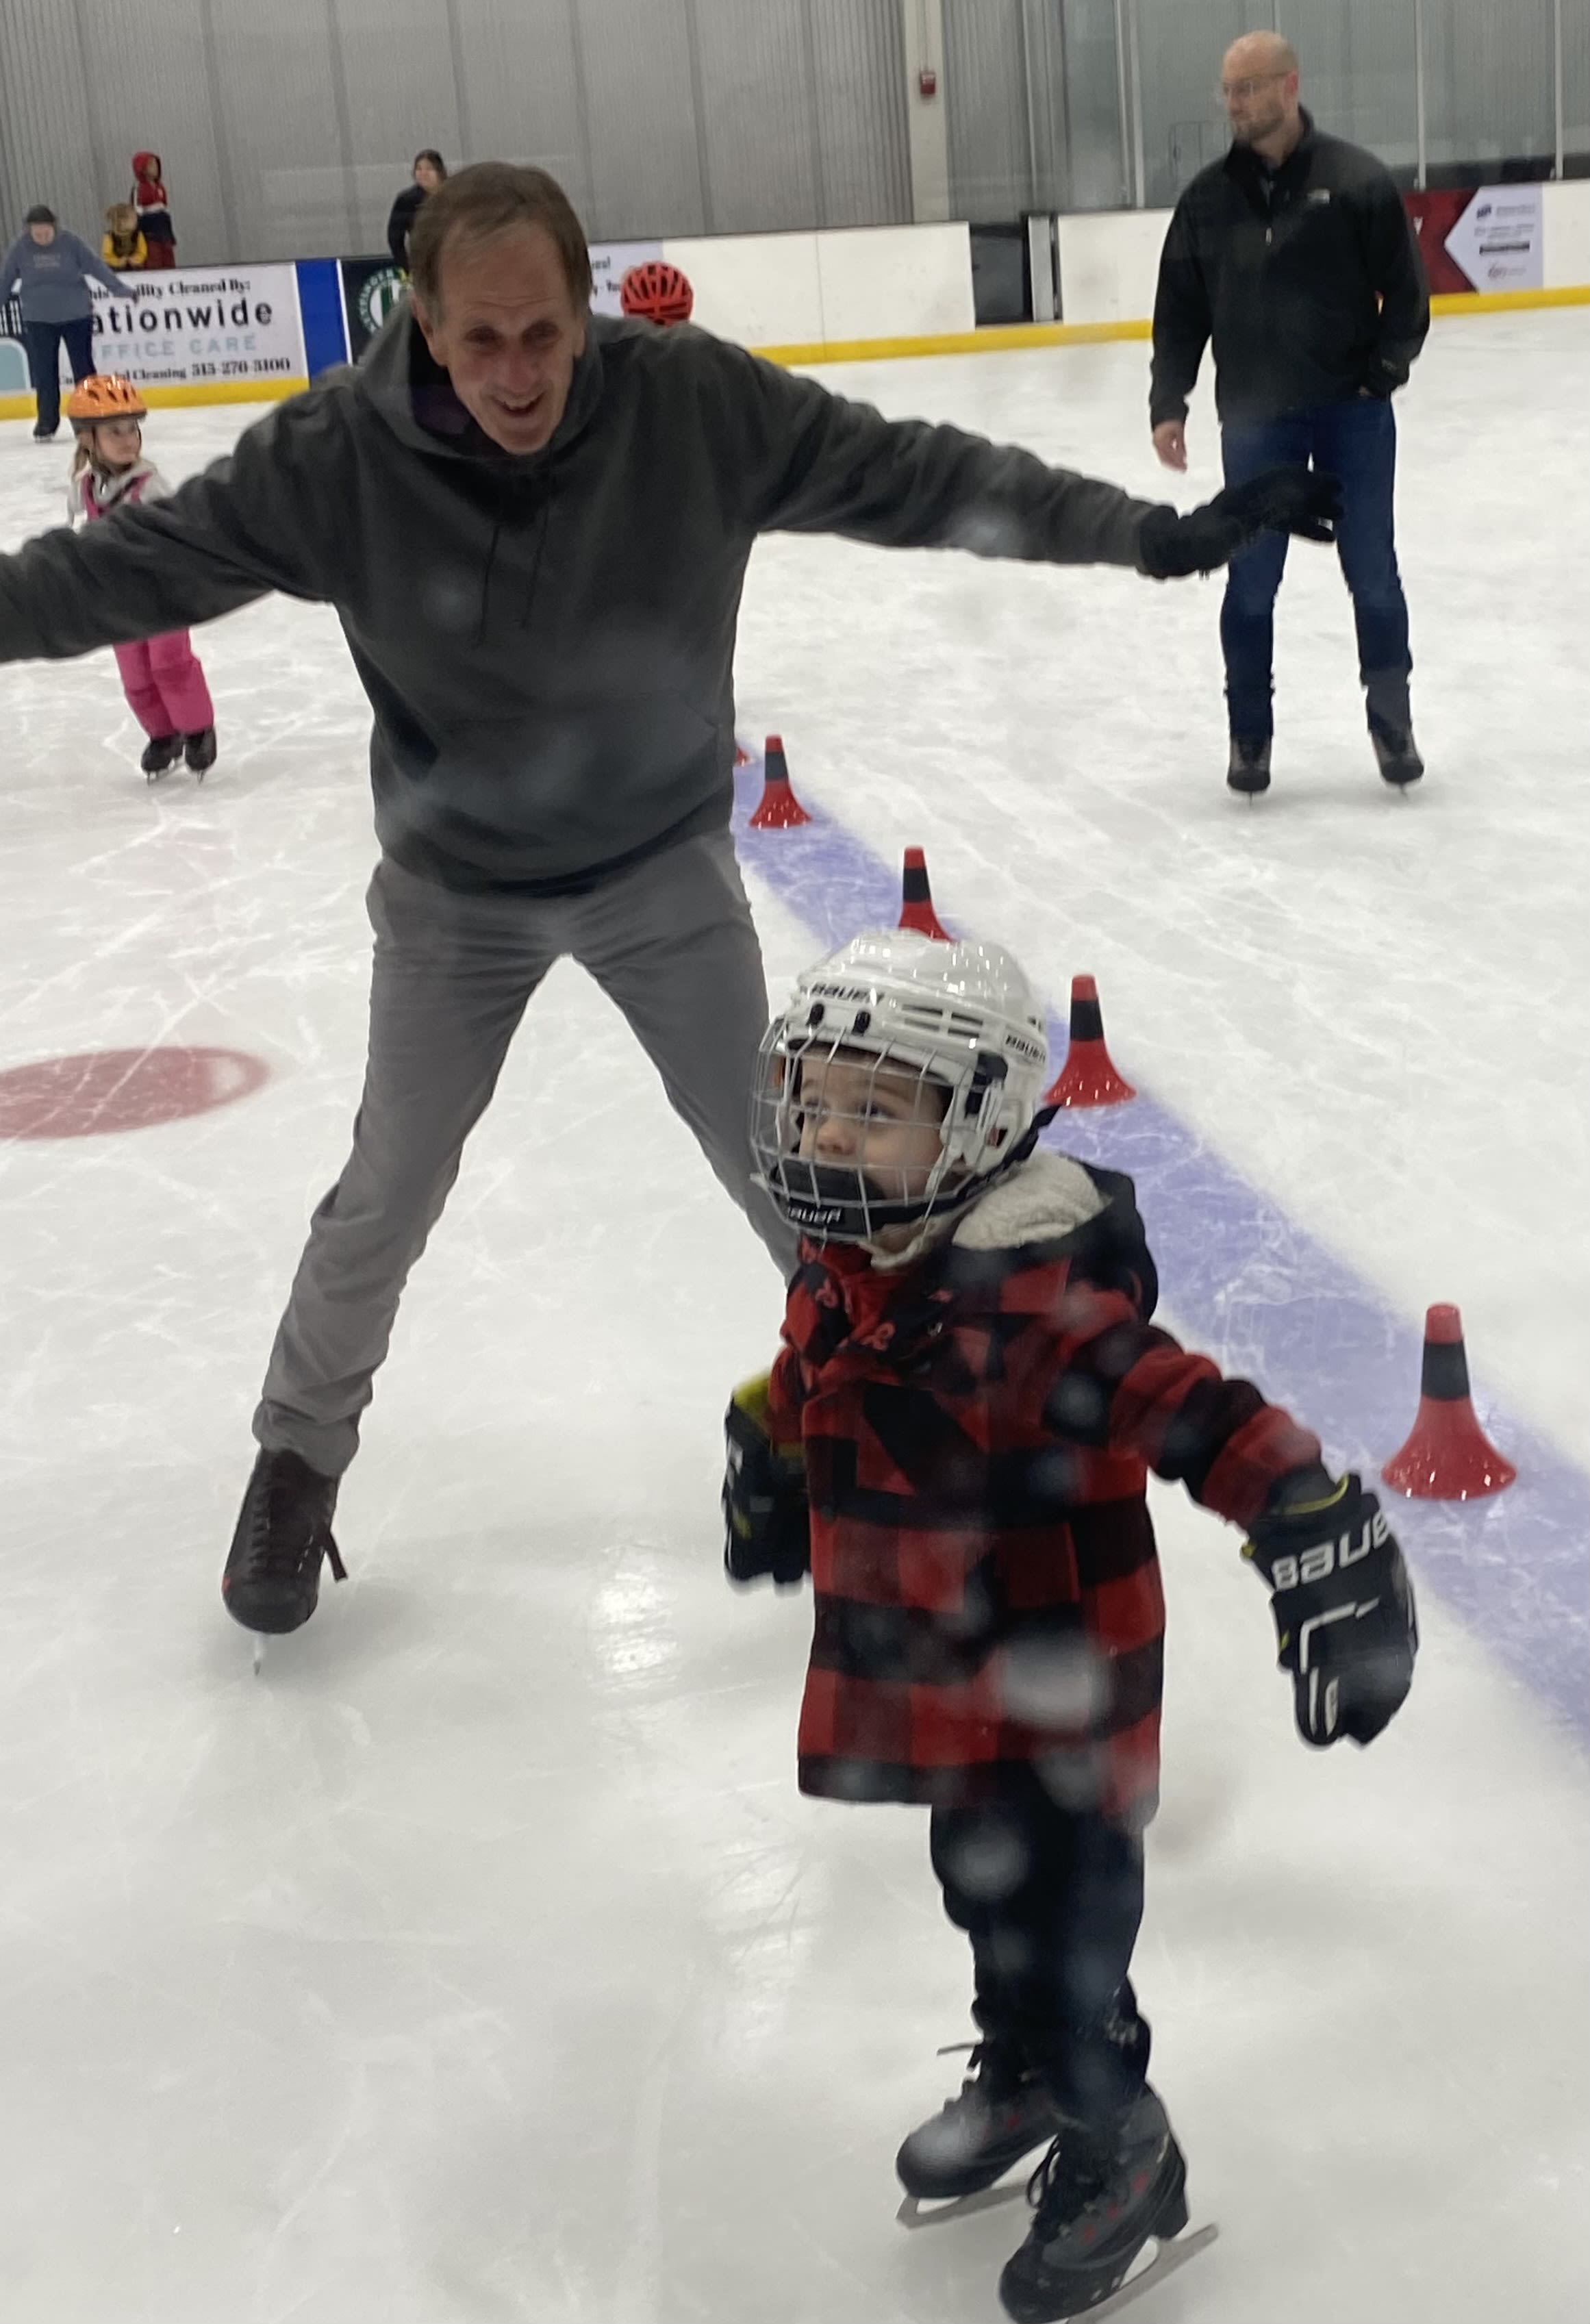 Even through health challenges, Egly finds little moments of joy, like skating with his grandson.